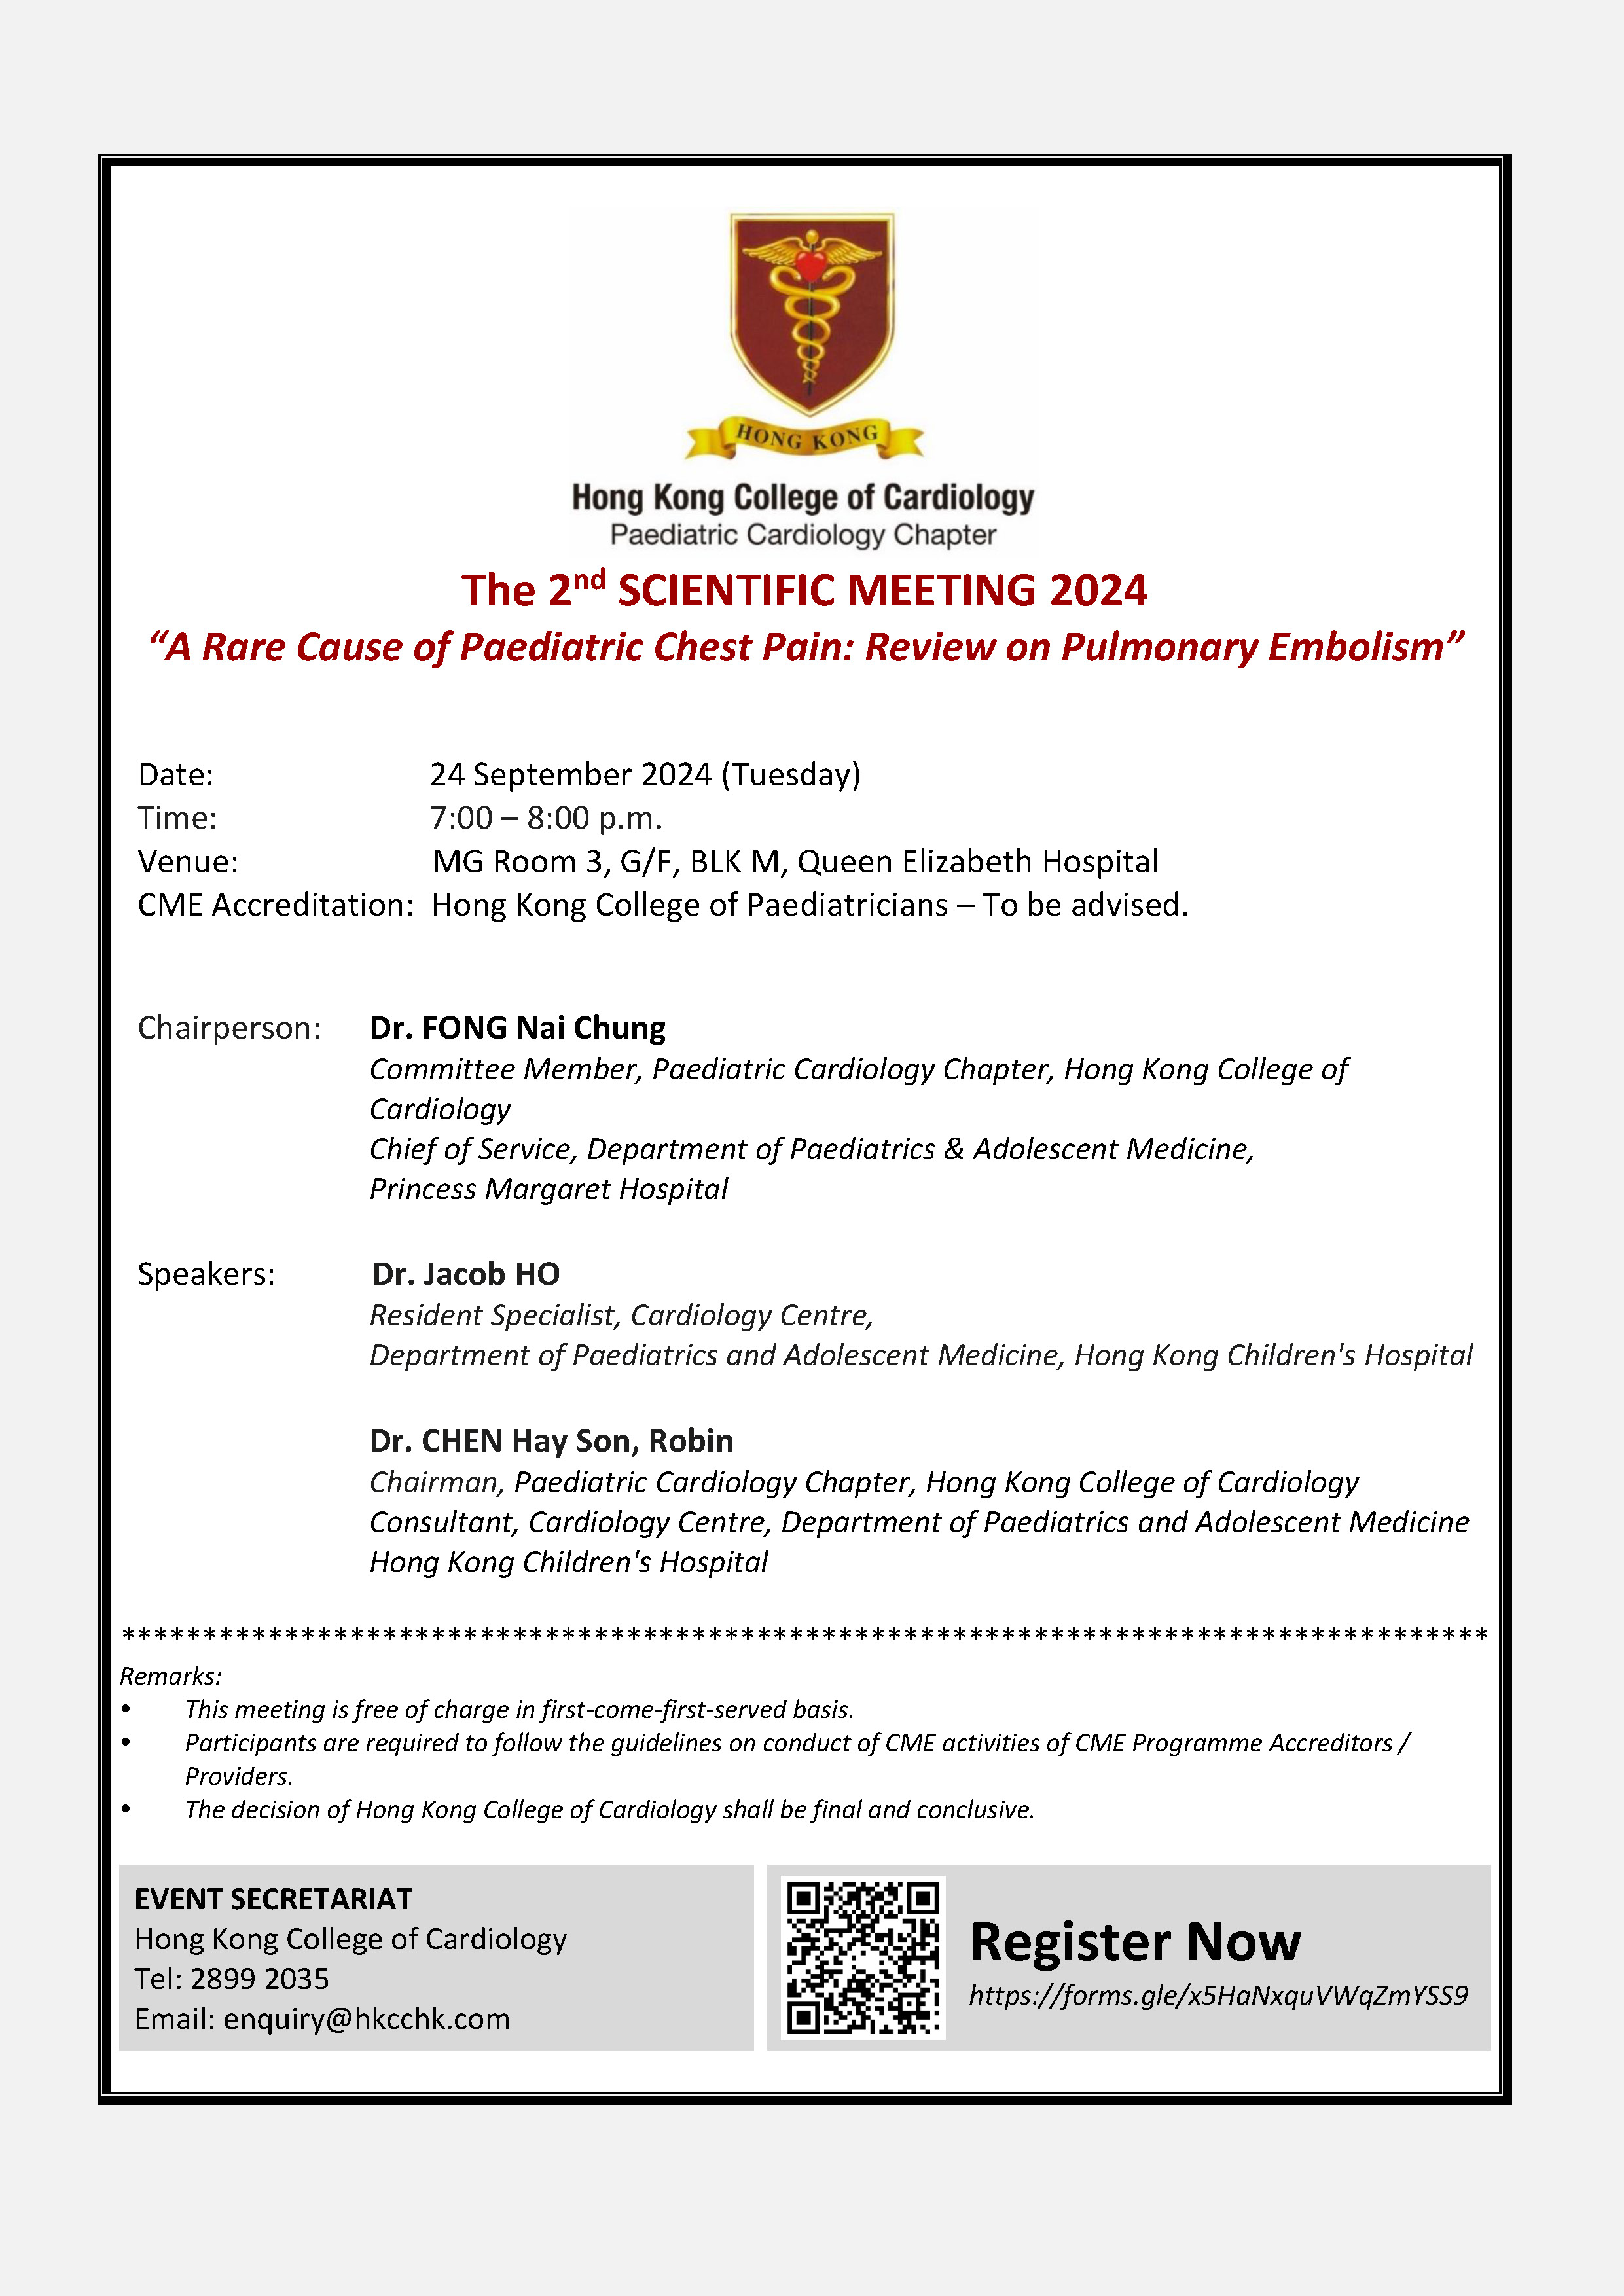 The 2nd Scientific Meeting 2024 of Paediatric Cardiology Chapter